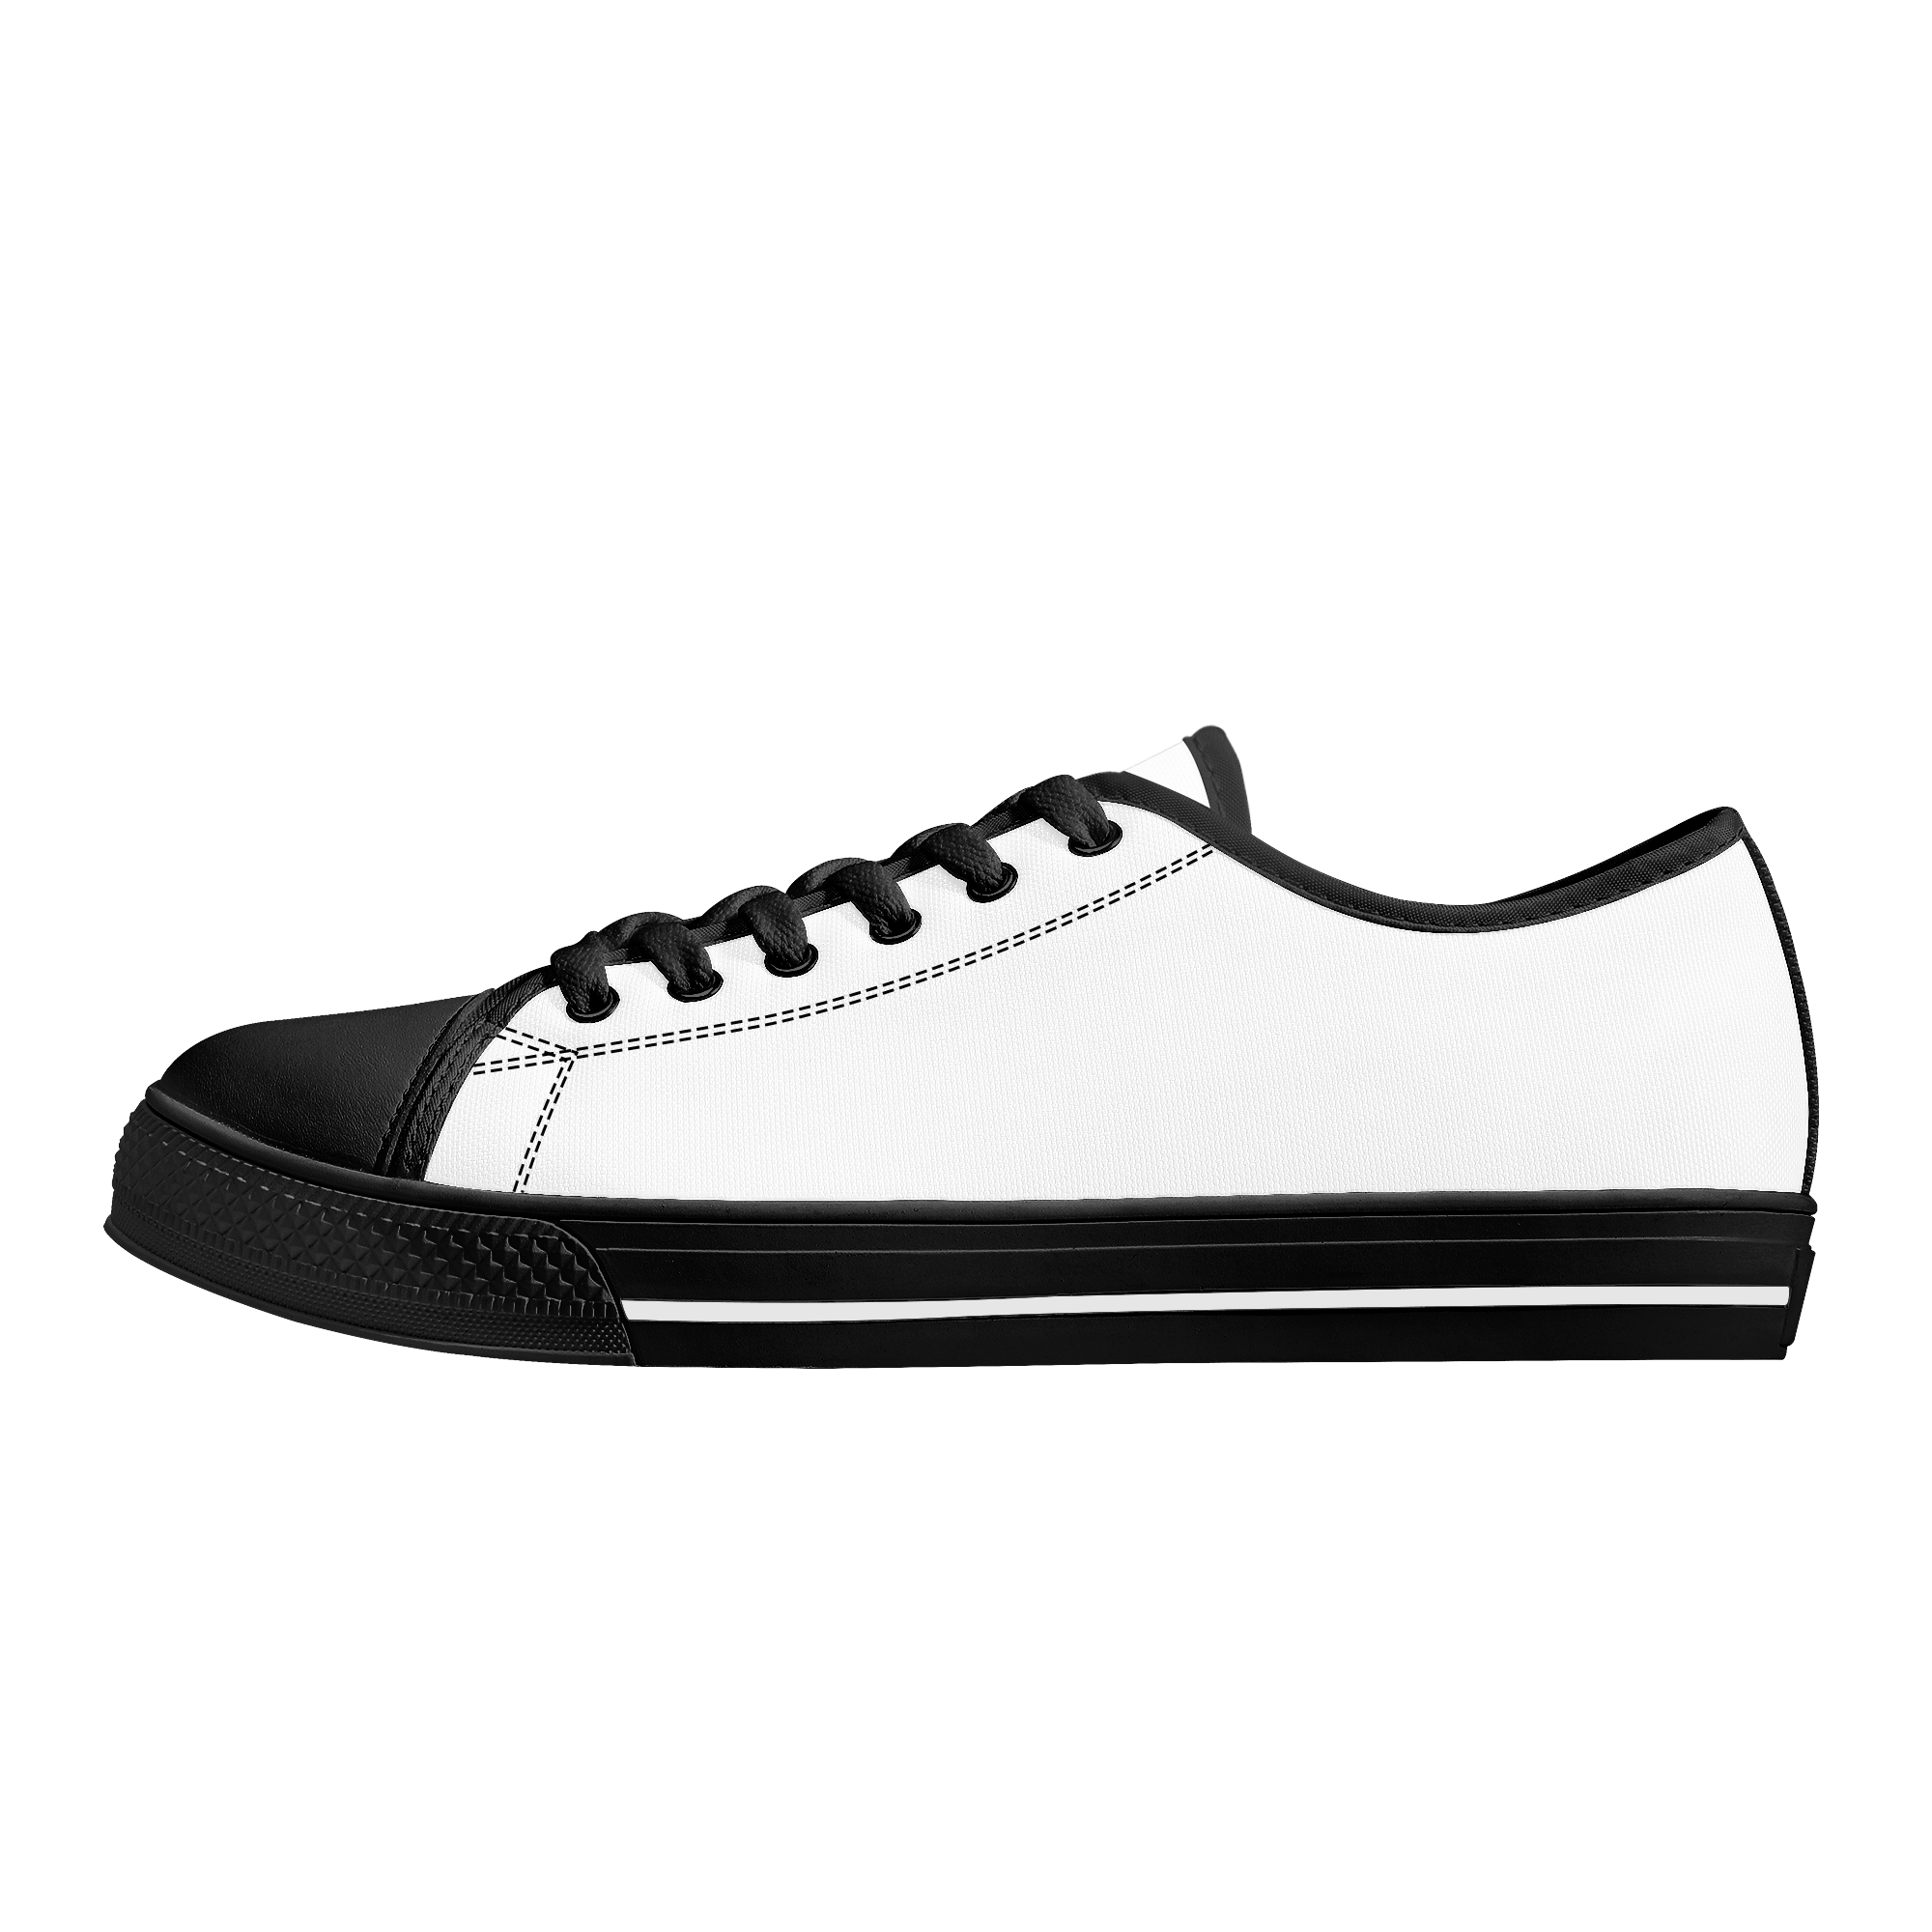 Customizable Low-Top Canvas Custom Shoes With Customized Tongue - Black - Shoe Zero